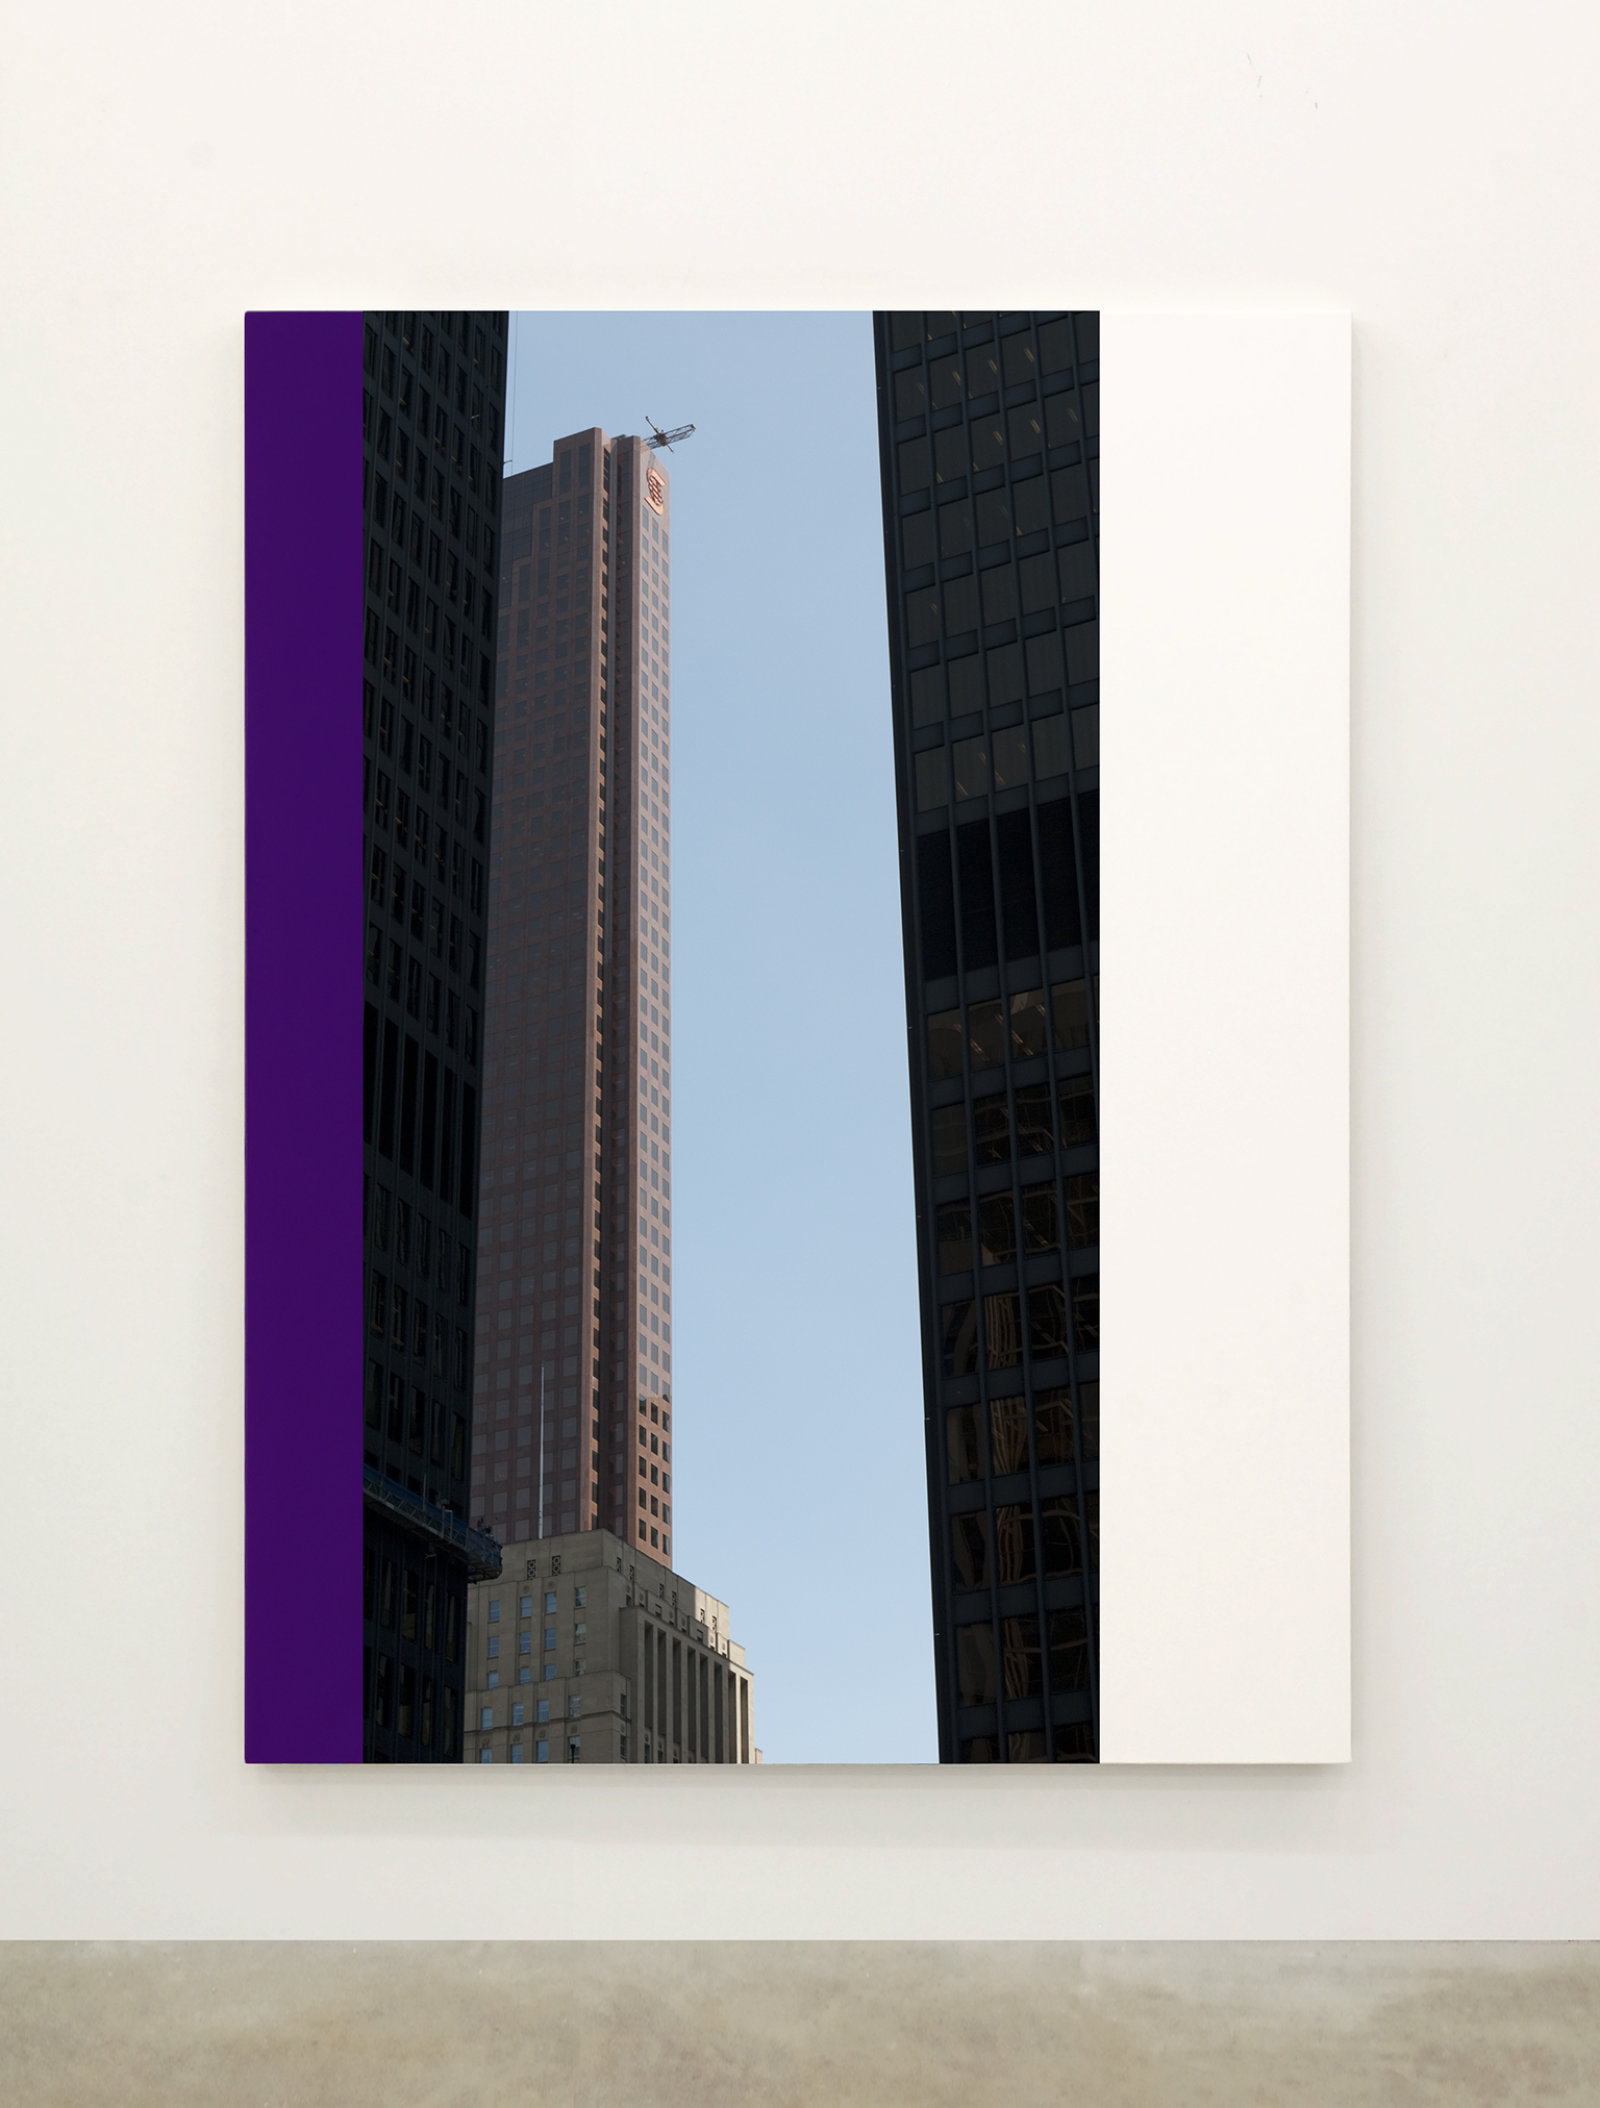 Ian Wallace, Abstract Painting X (The Financial District), 2010, 12 photolaminate with acrylic on canvas panels, each 96 x 72 in. (244 x 183 cm)